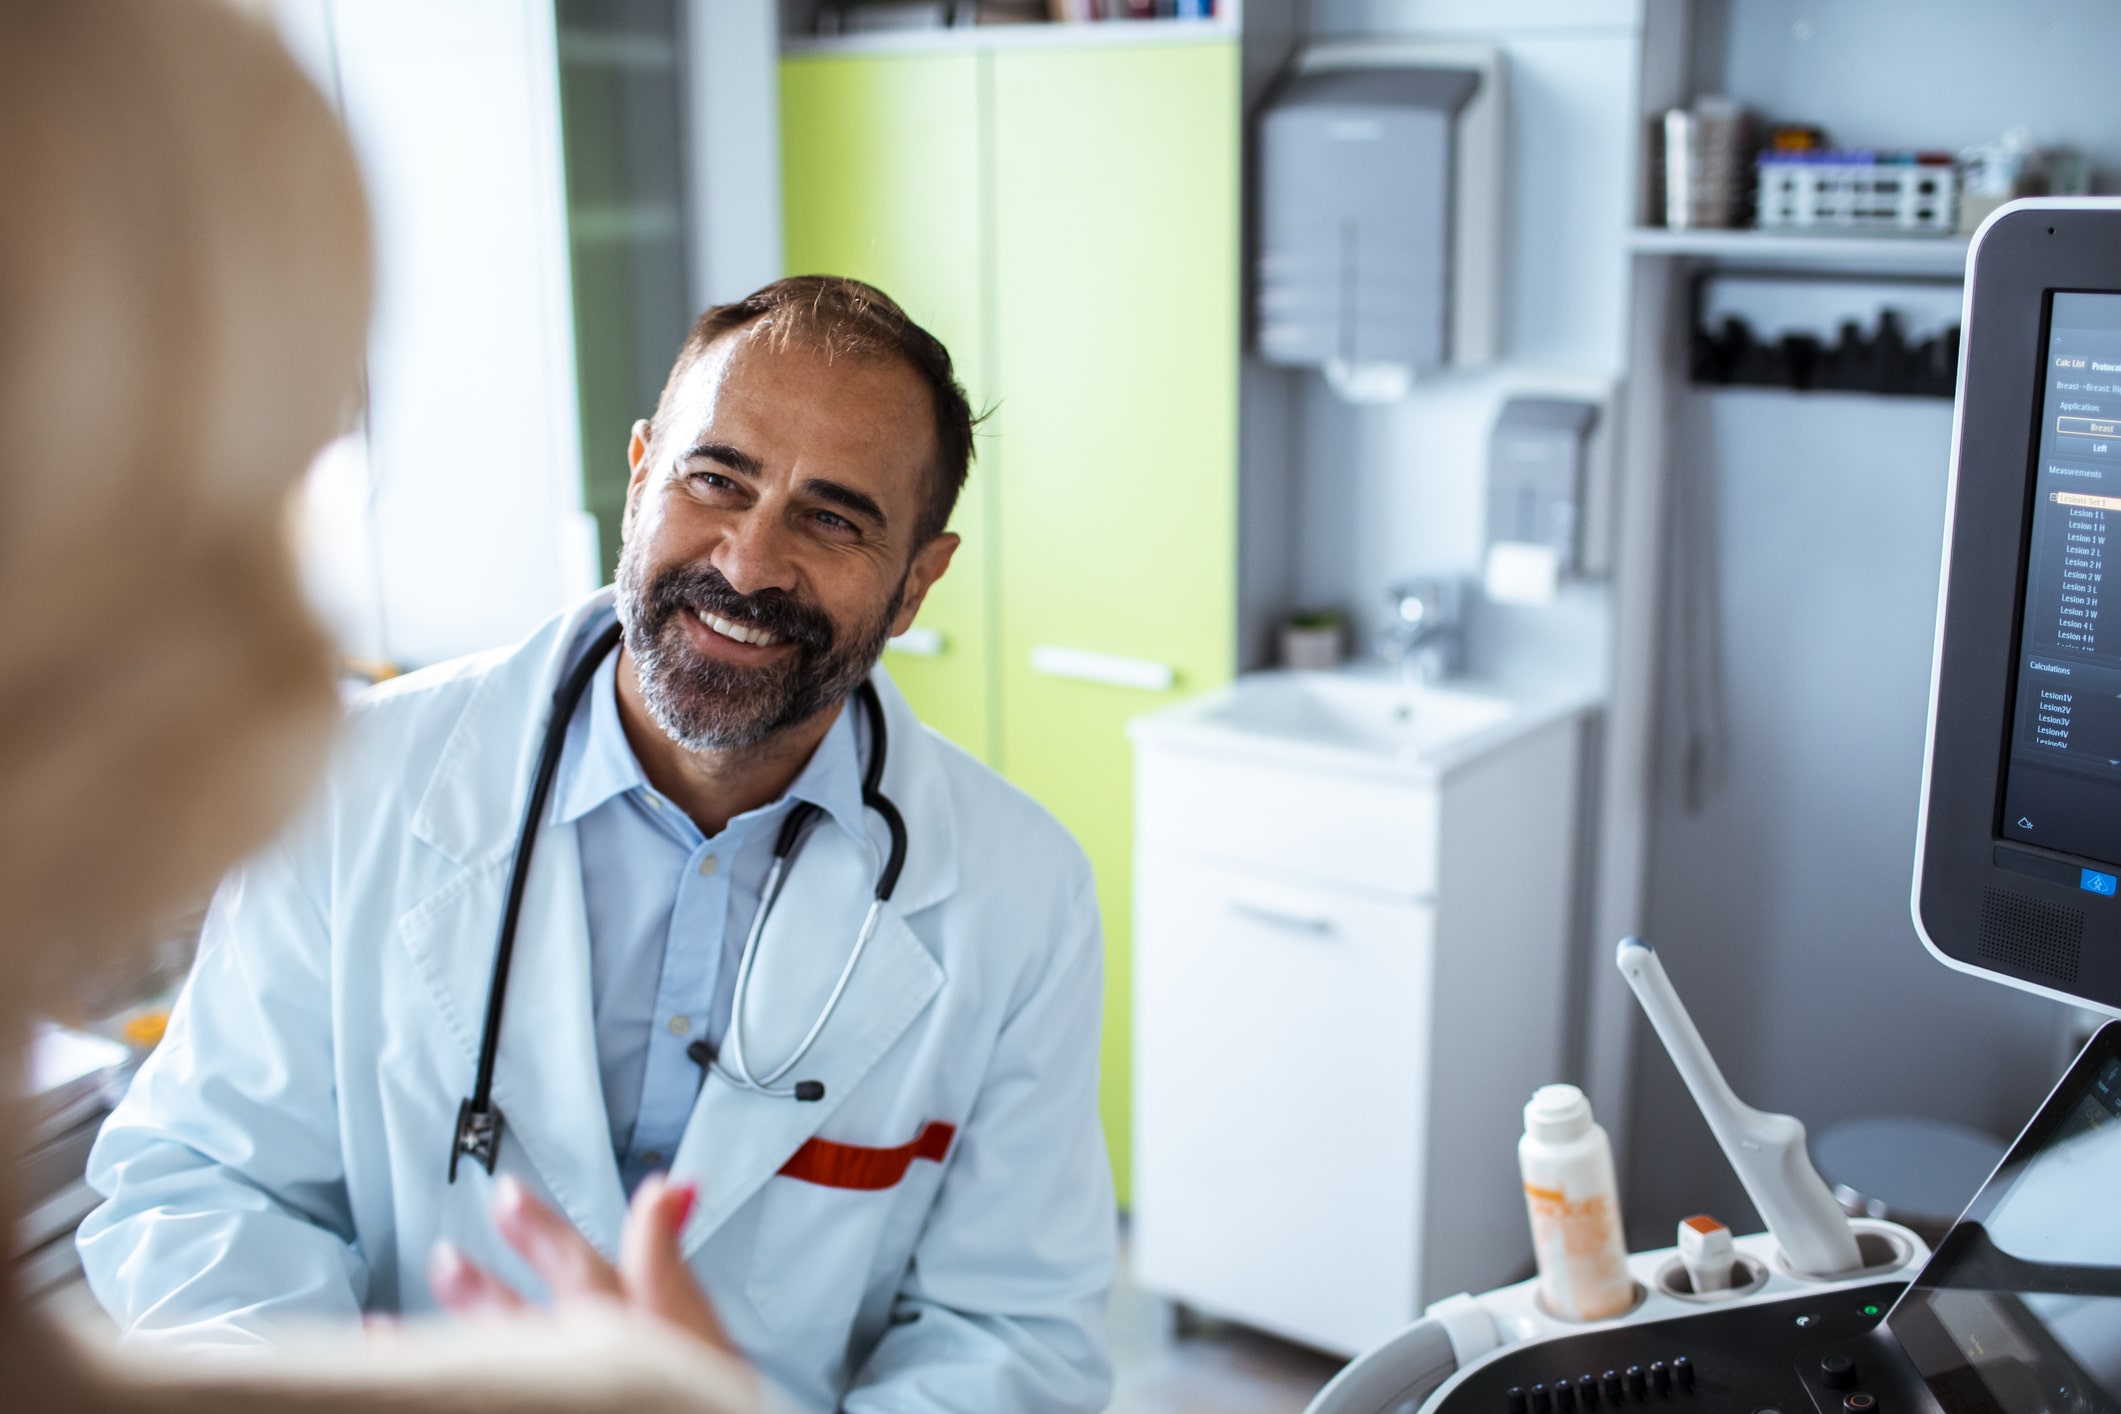 A healthcare worker smiling in conversation with another person.